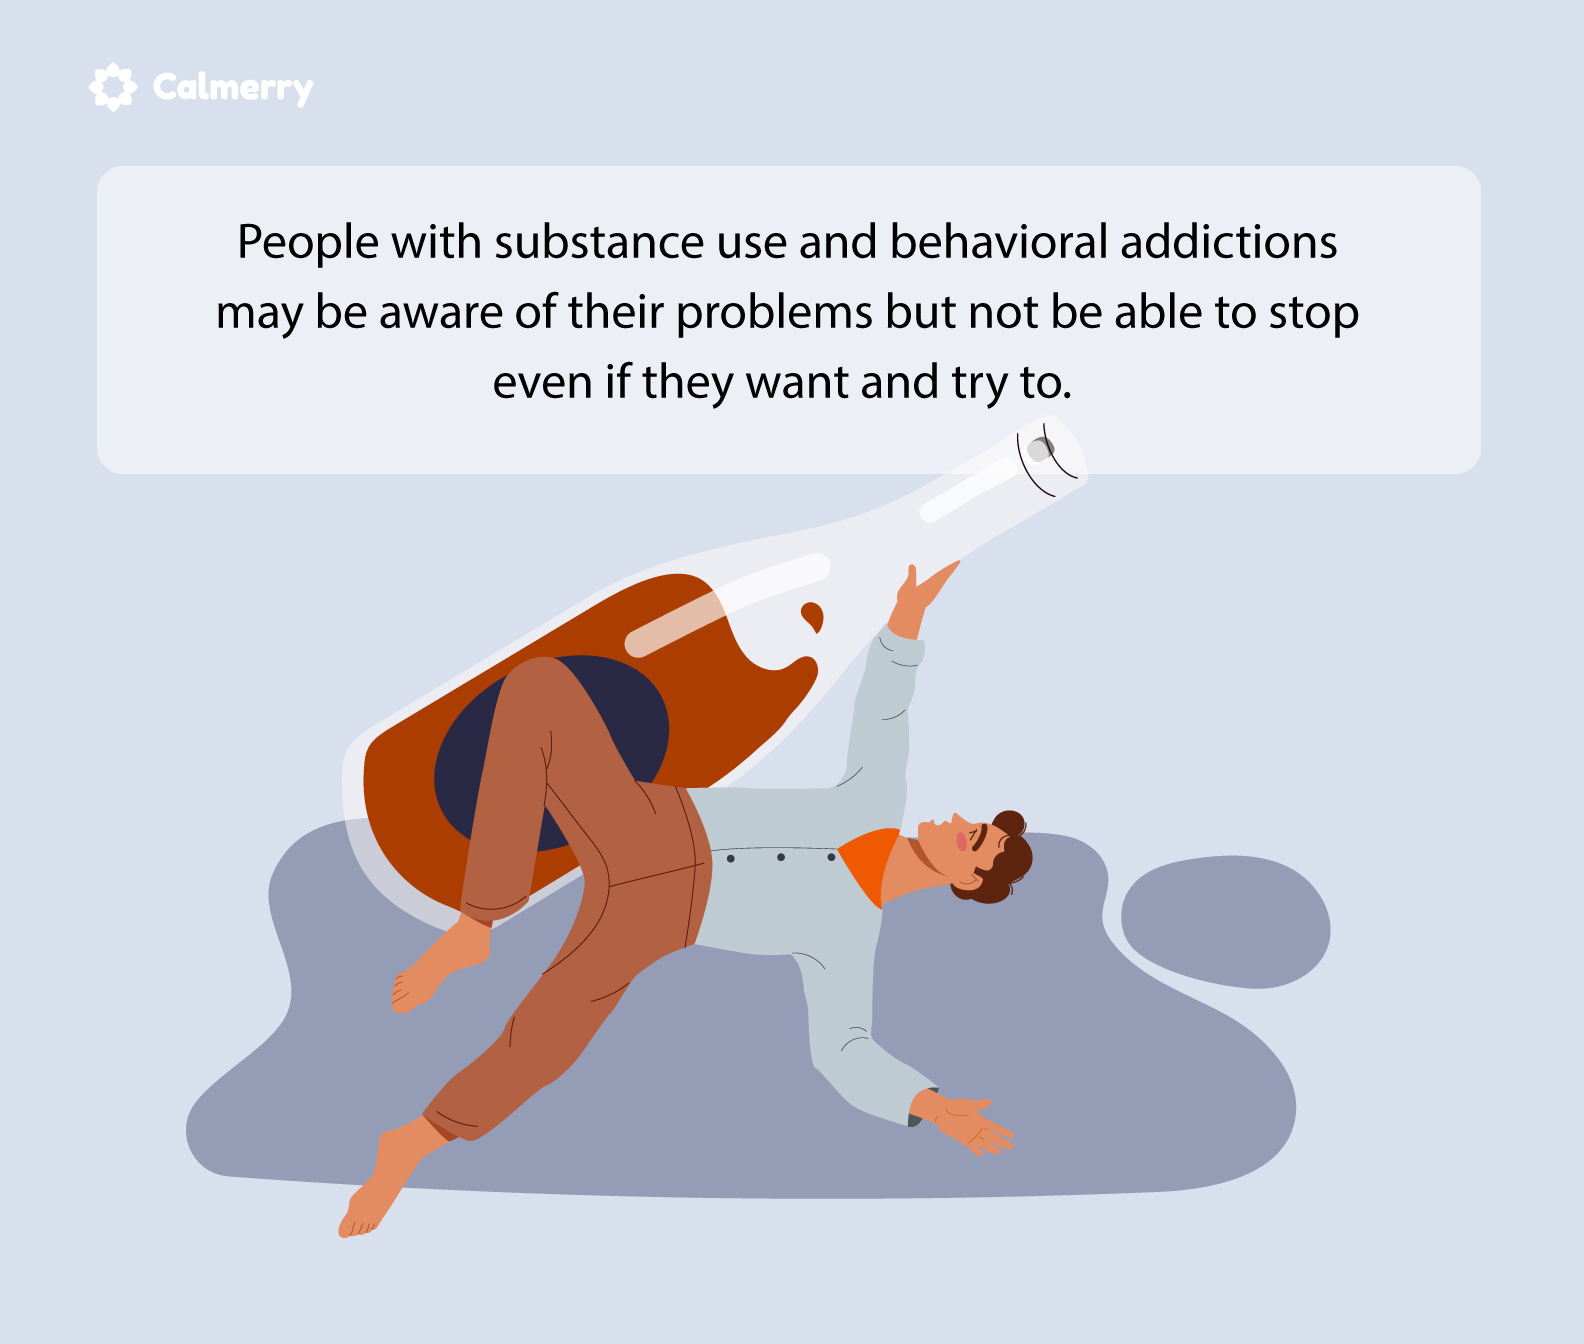 Substance use disorder